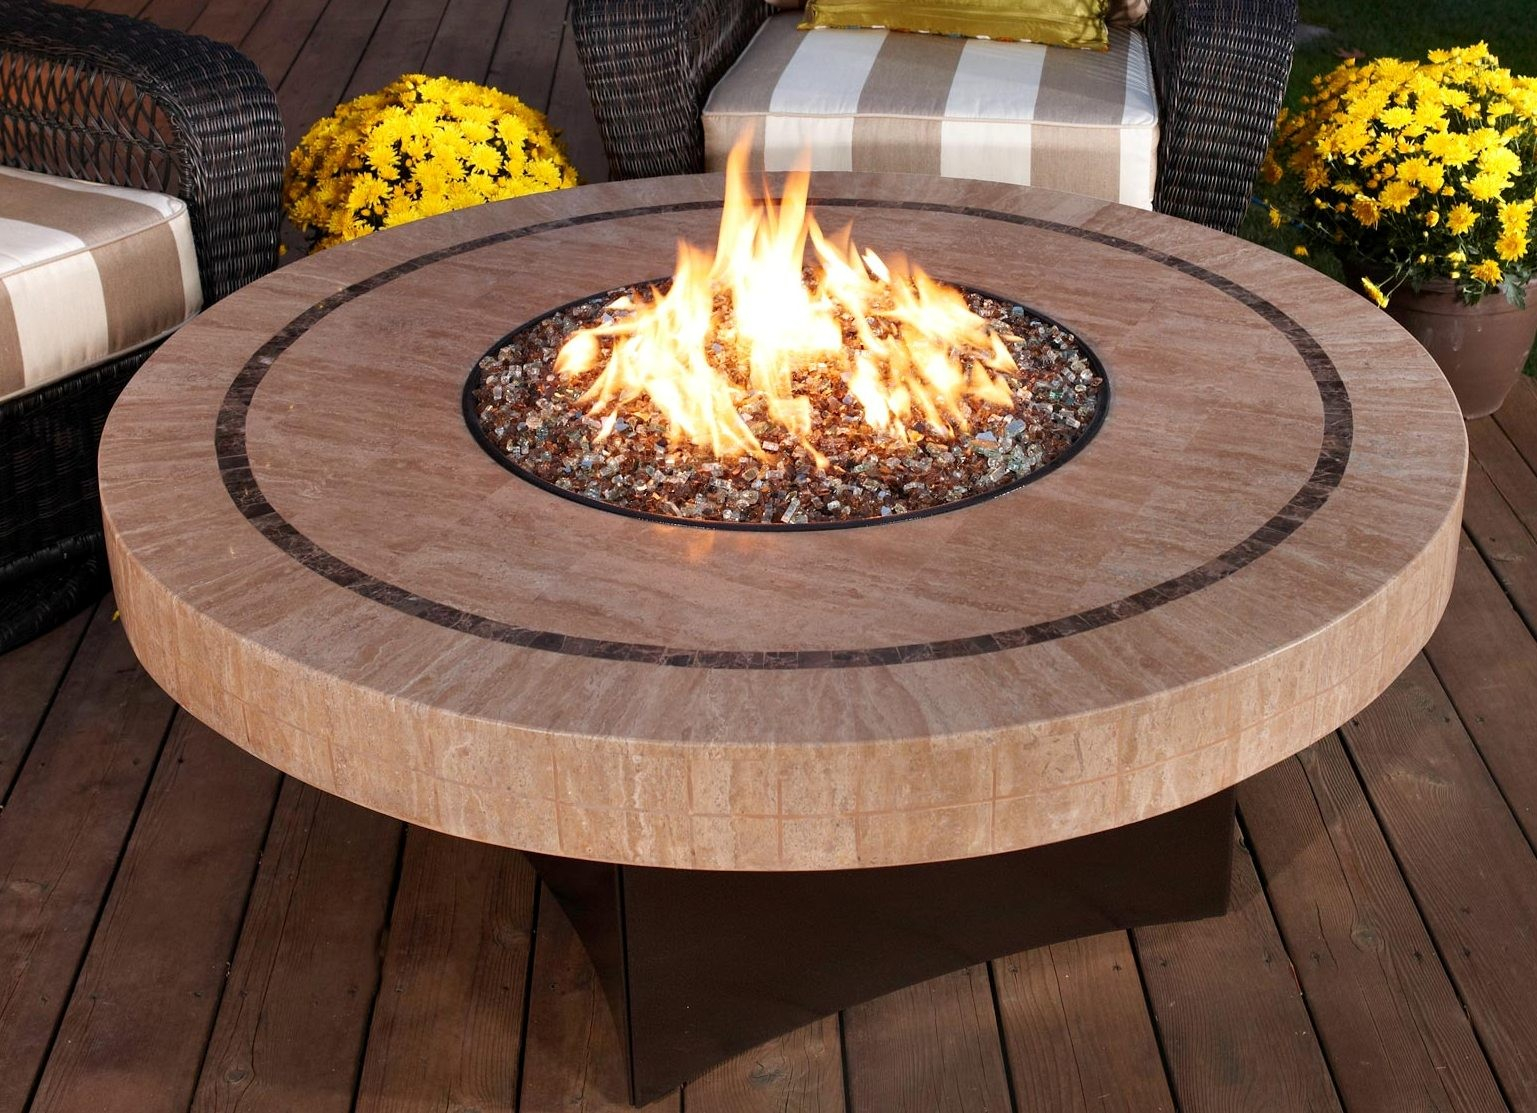 Portable Outdoor Gas Fire Pit Fireplace Design Ideas throughout sizing 1537 X 1113